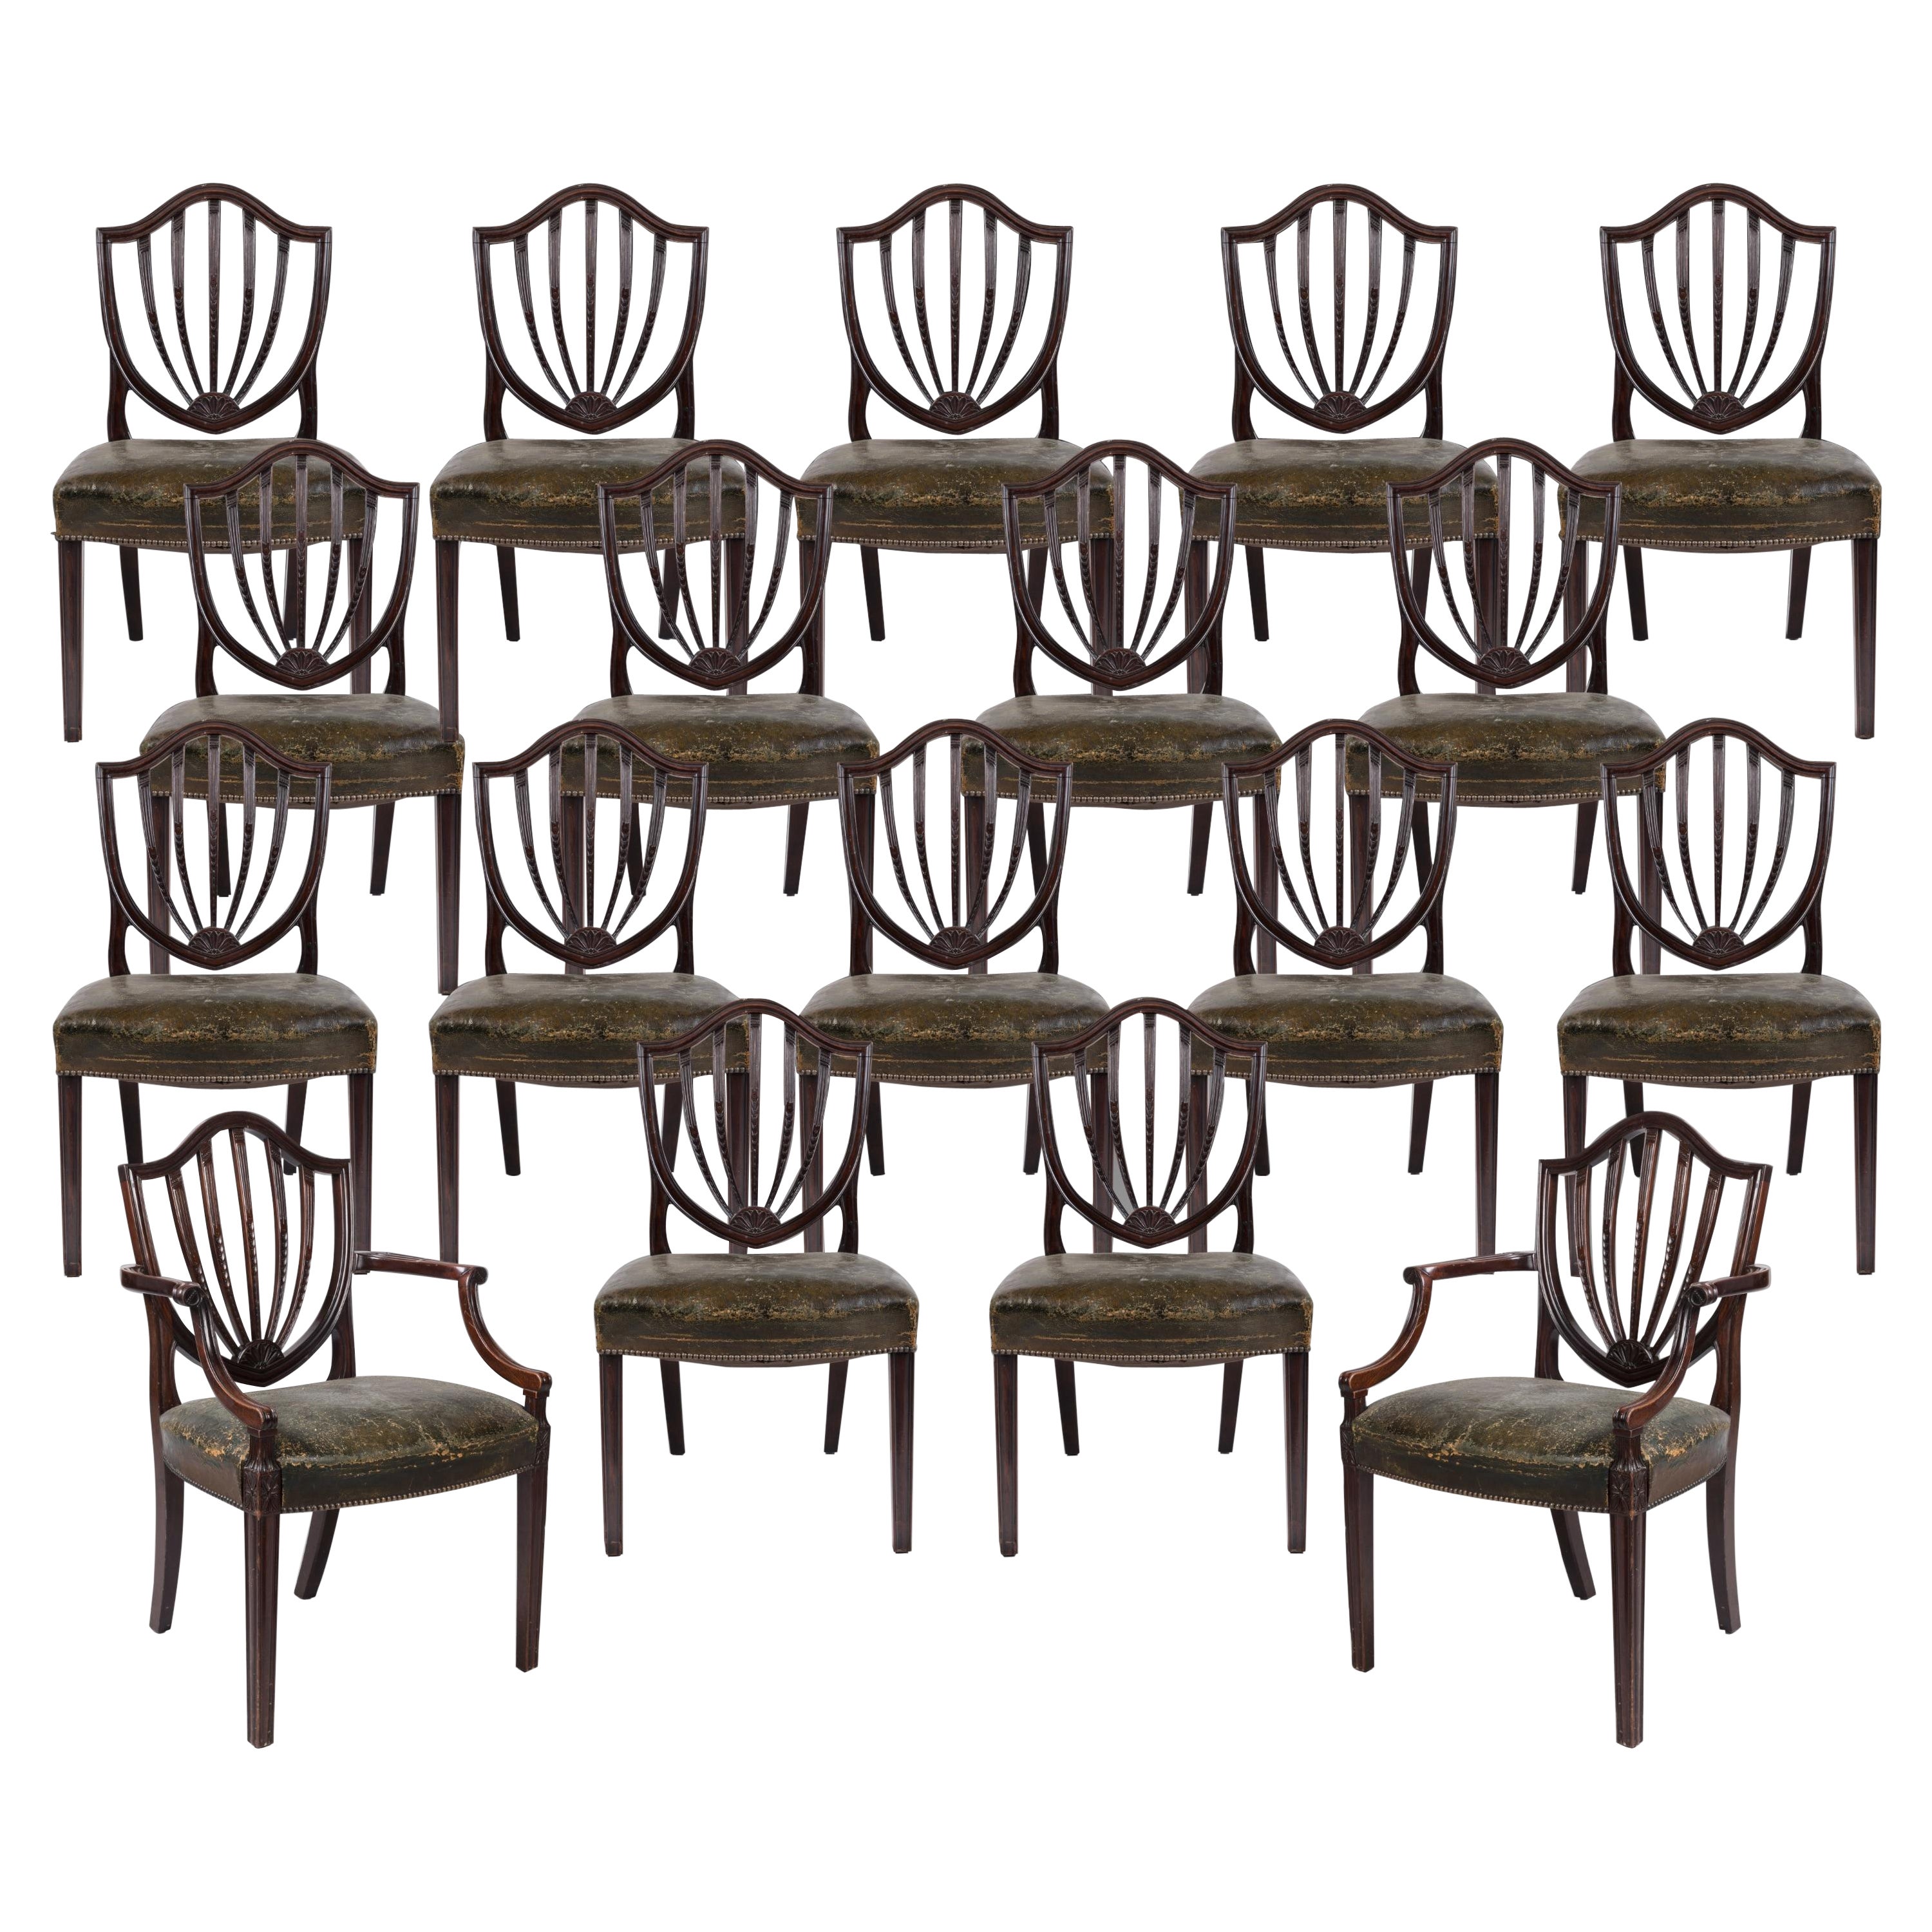 Rare 19th Century Period Set of 12 Mahogany Dining Chairs in the Georgian Style For Sale